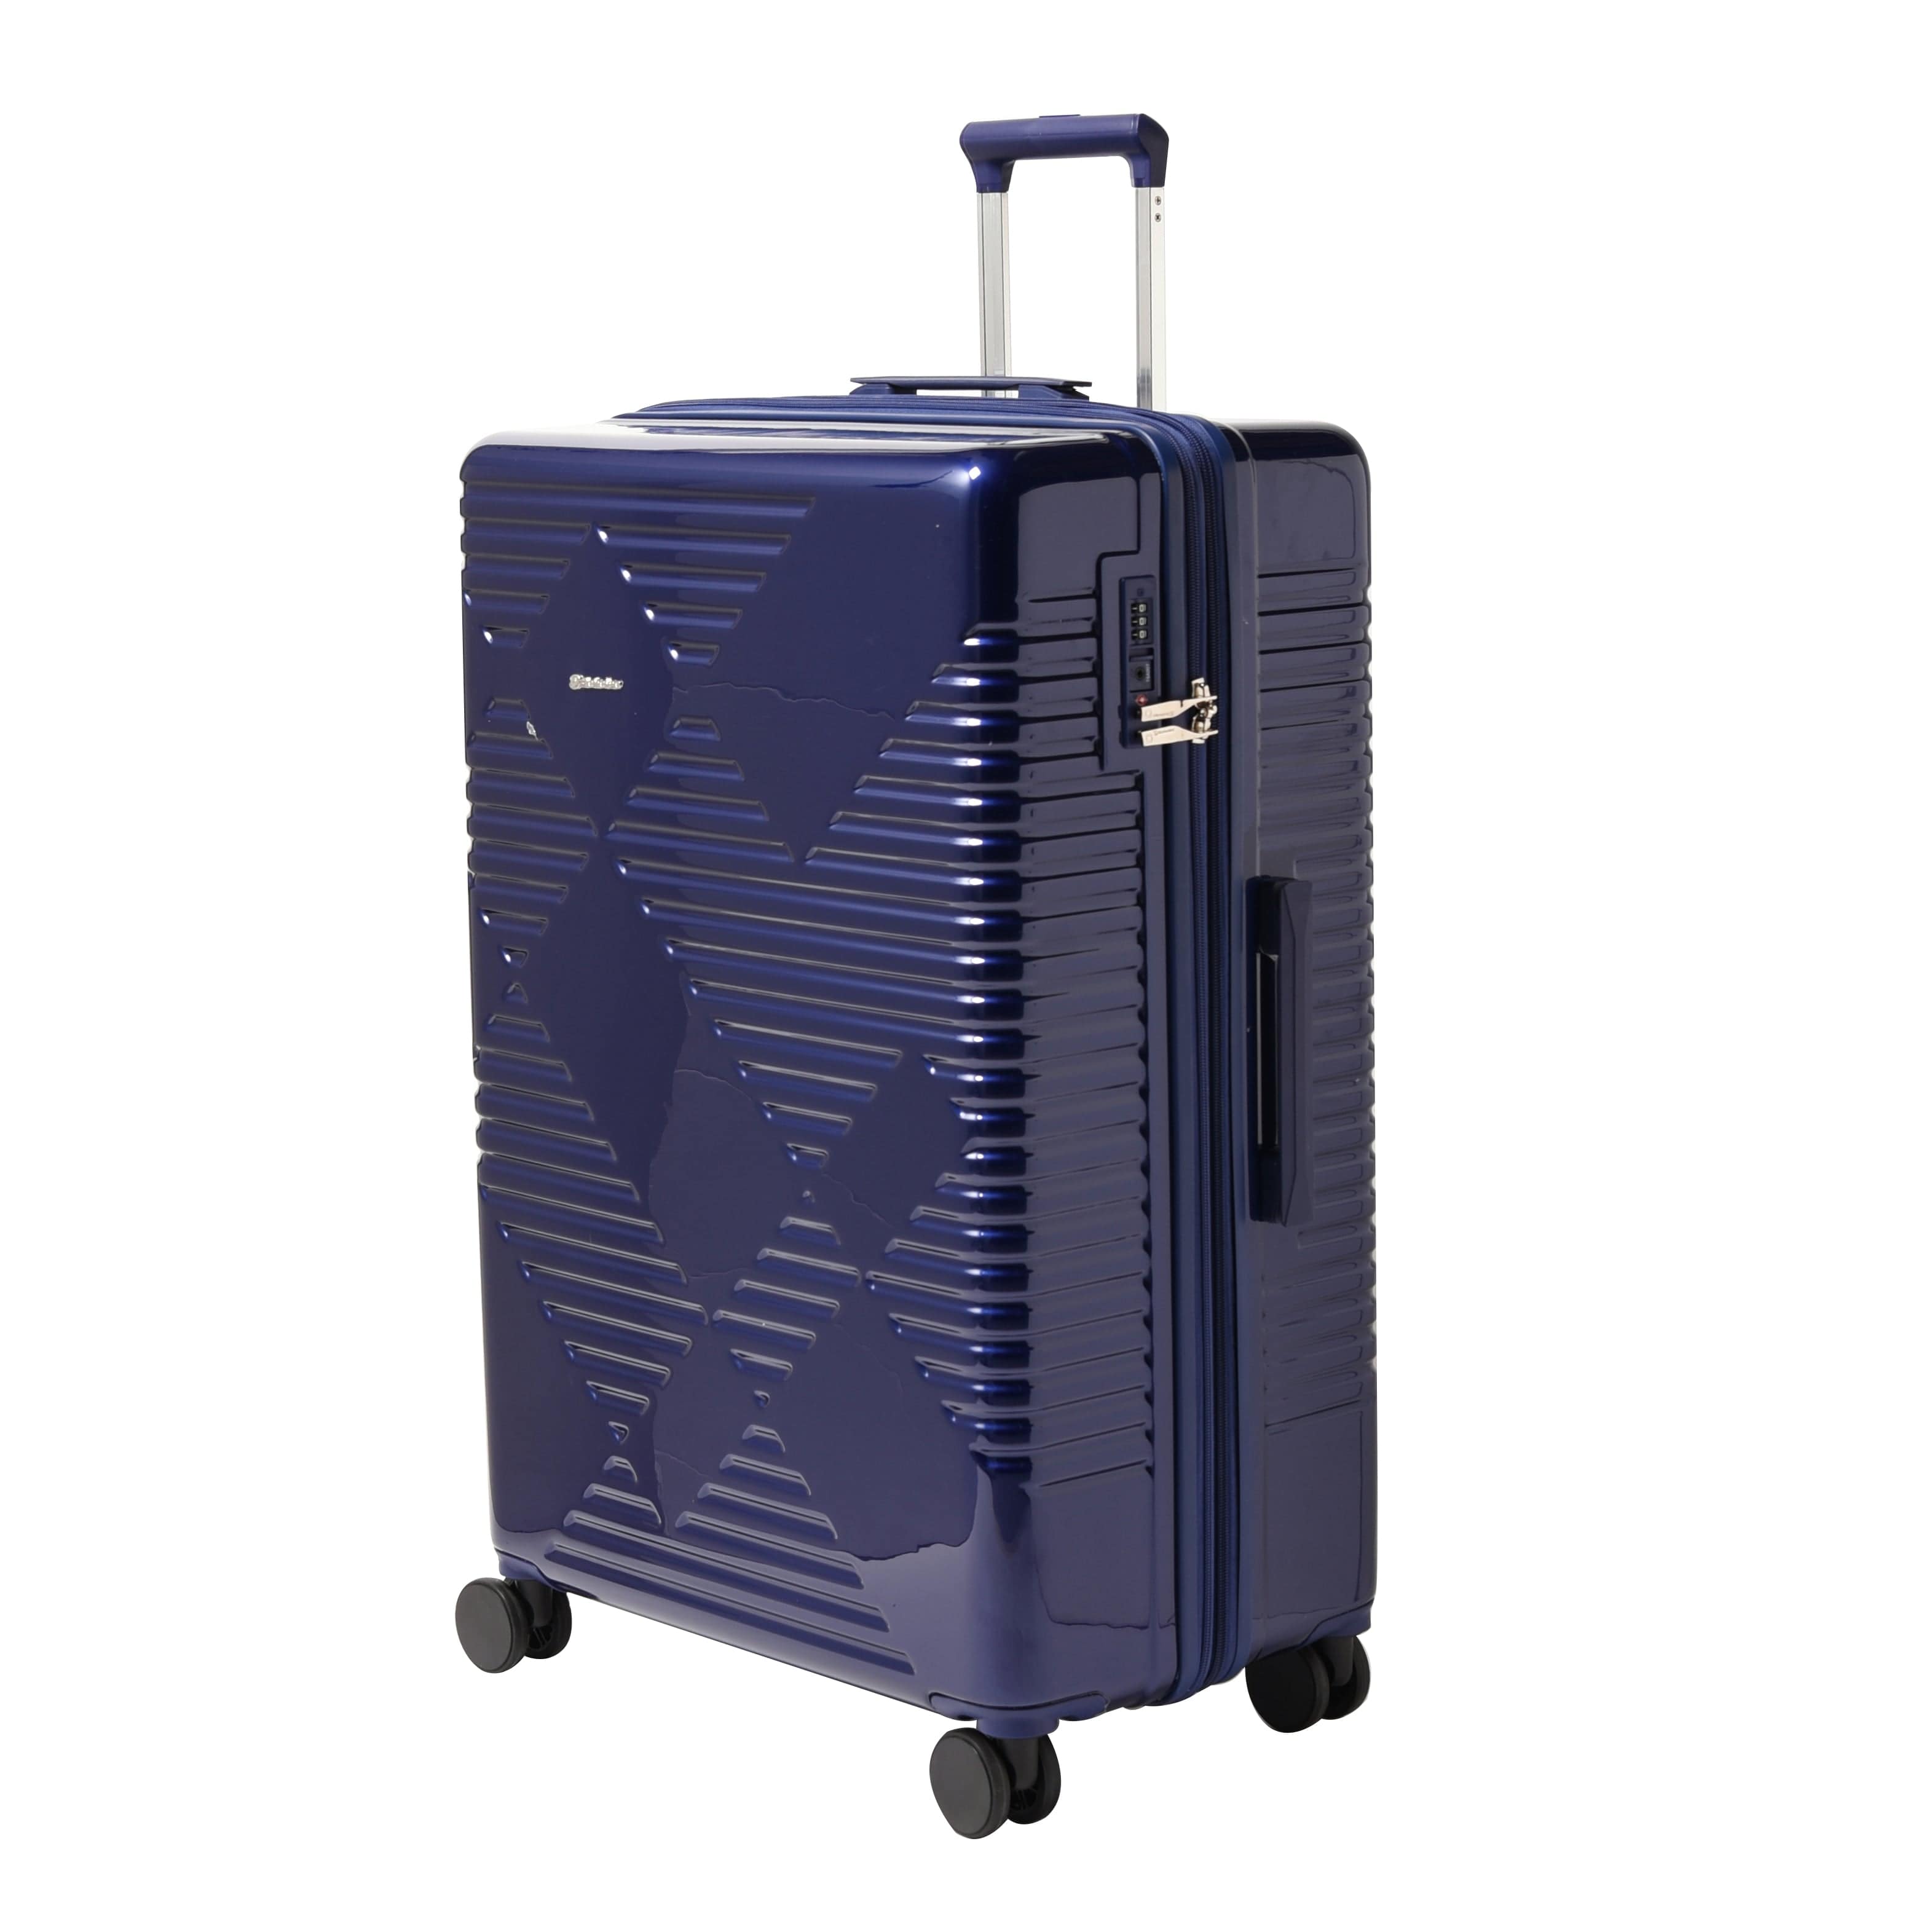 Echolac Extravagant 82cm Hardcase Expandable 4 Double Wheel Check-In Luggage Trolley Blue - CTH0062 S- 32 BLUE 60102